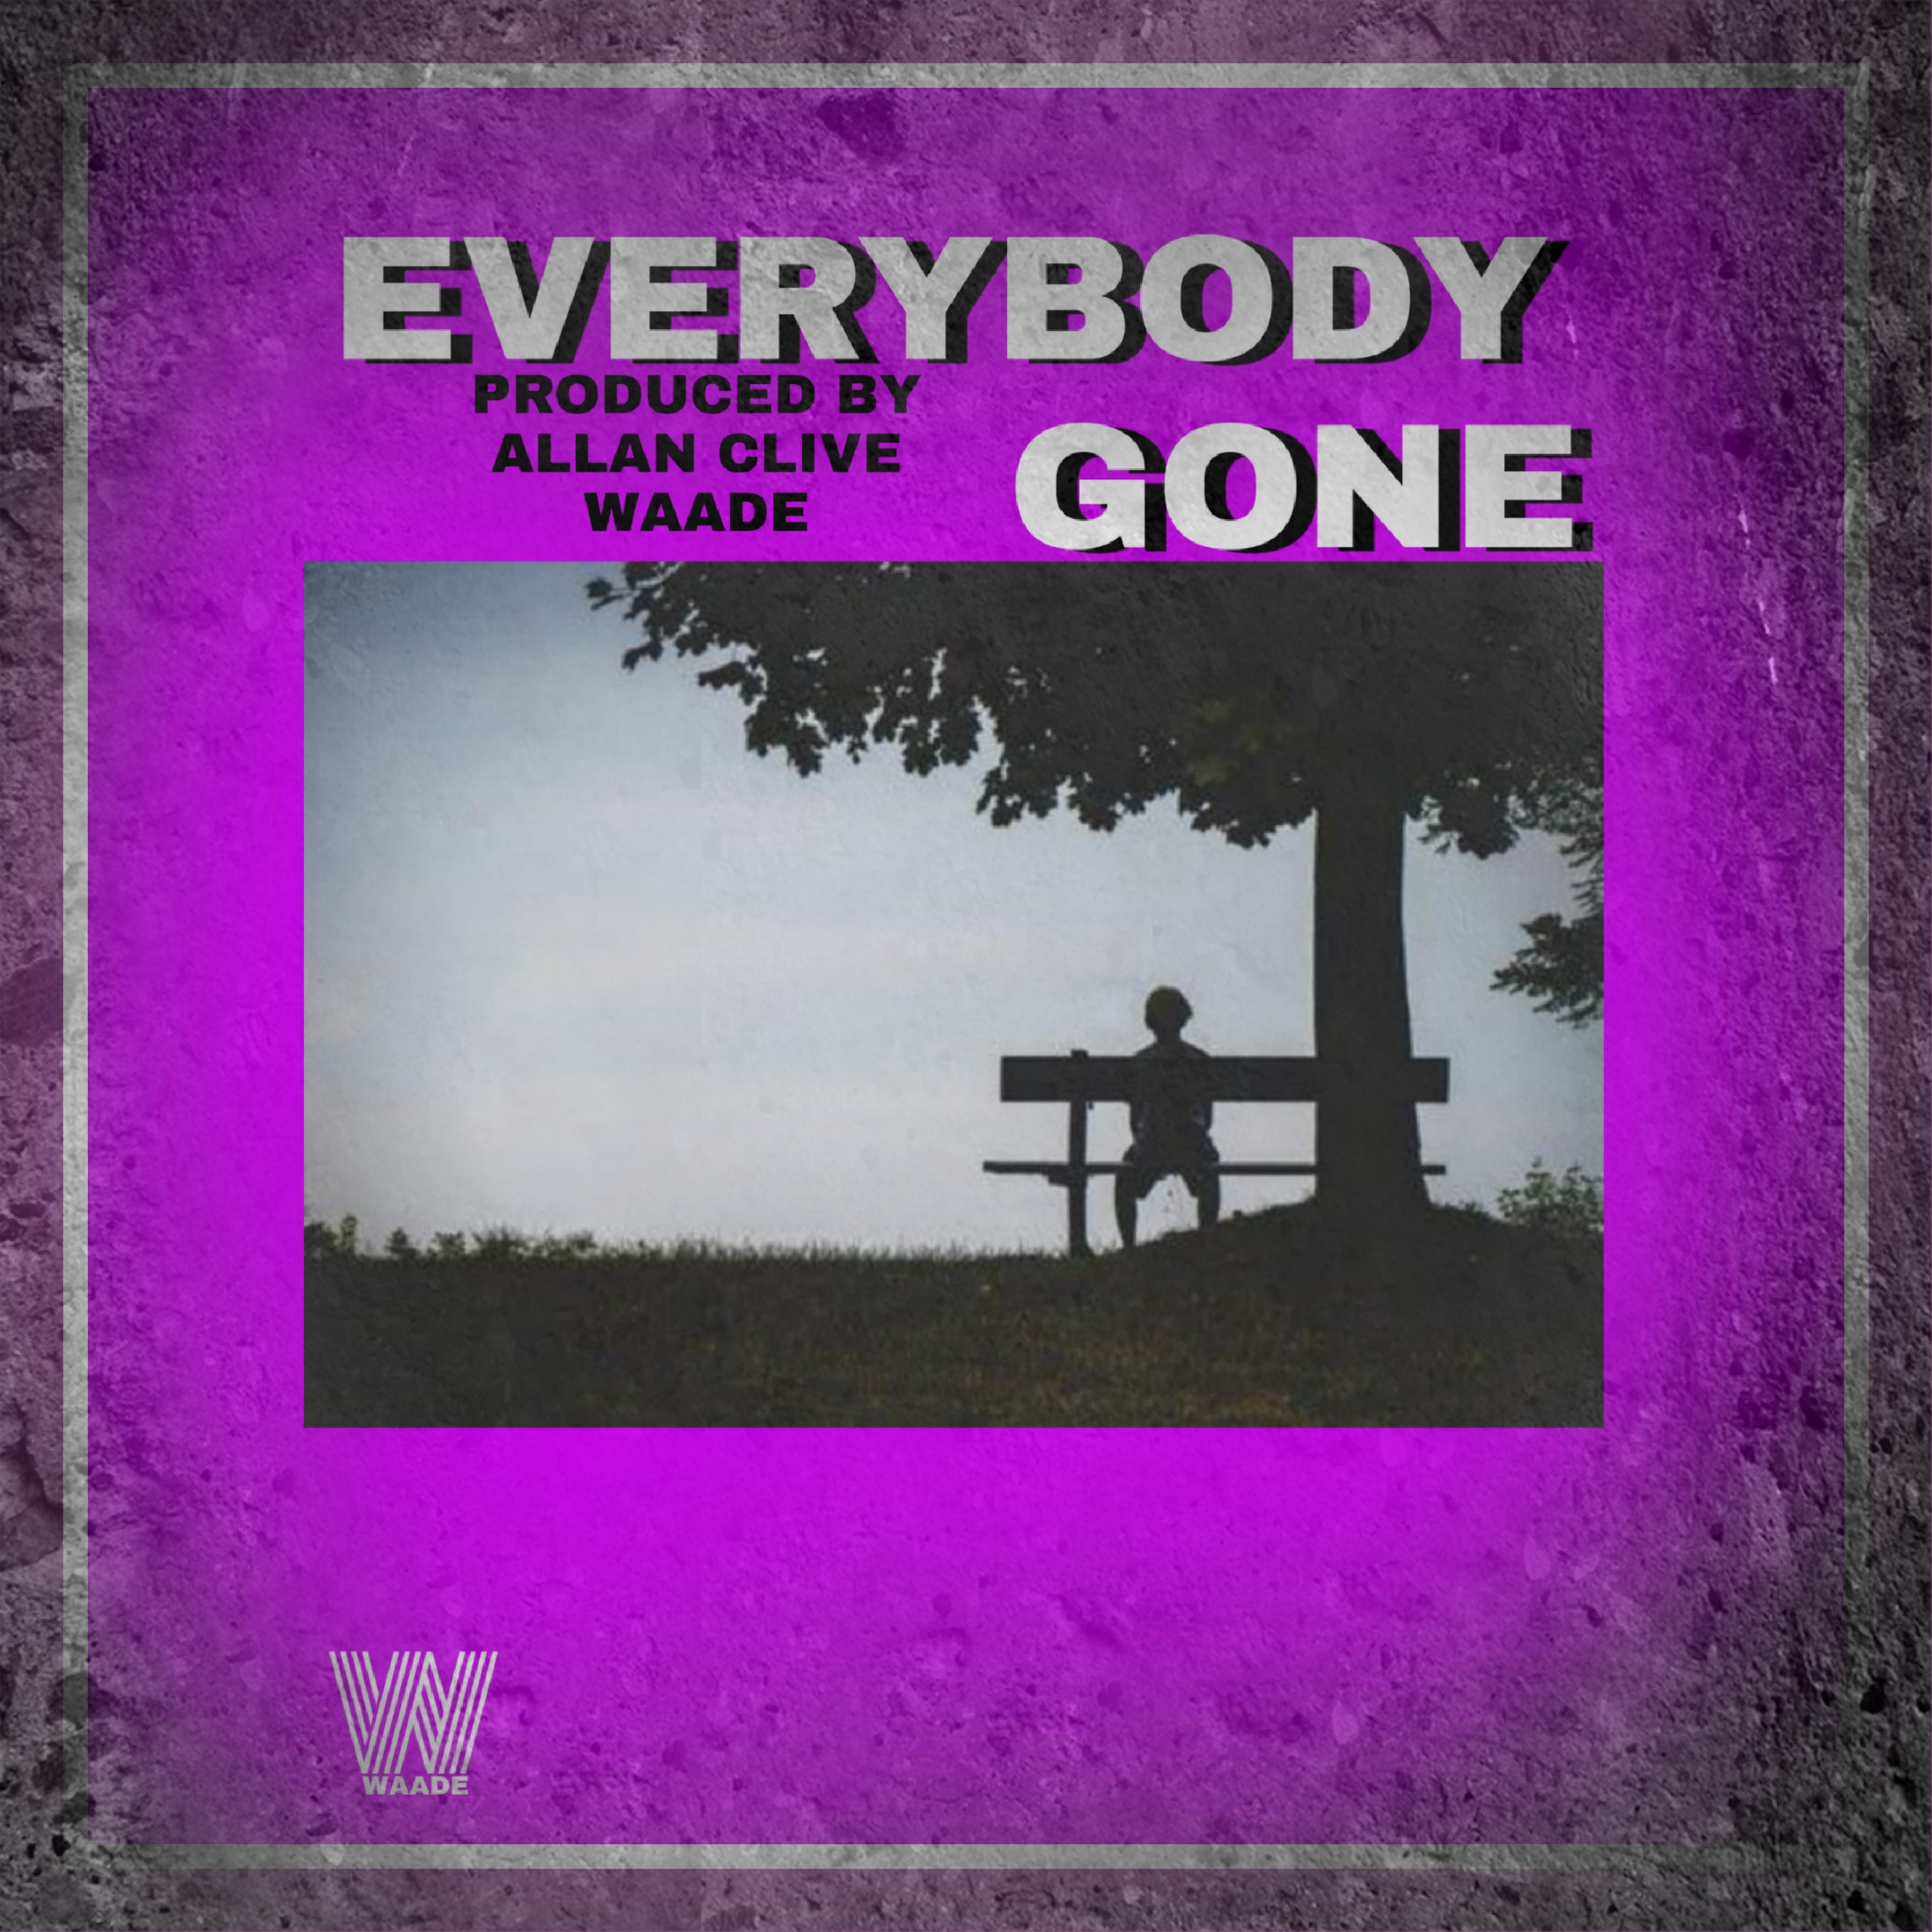 Listen to “Everybody Gone” – Waade